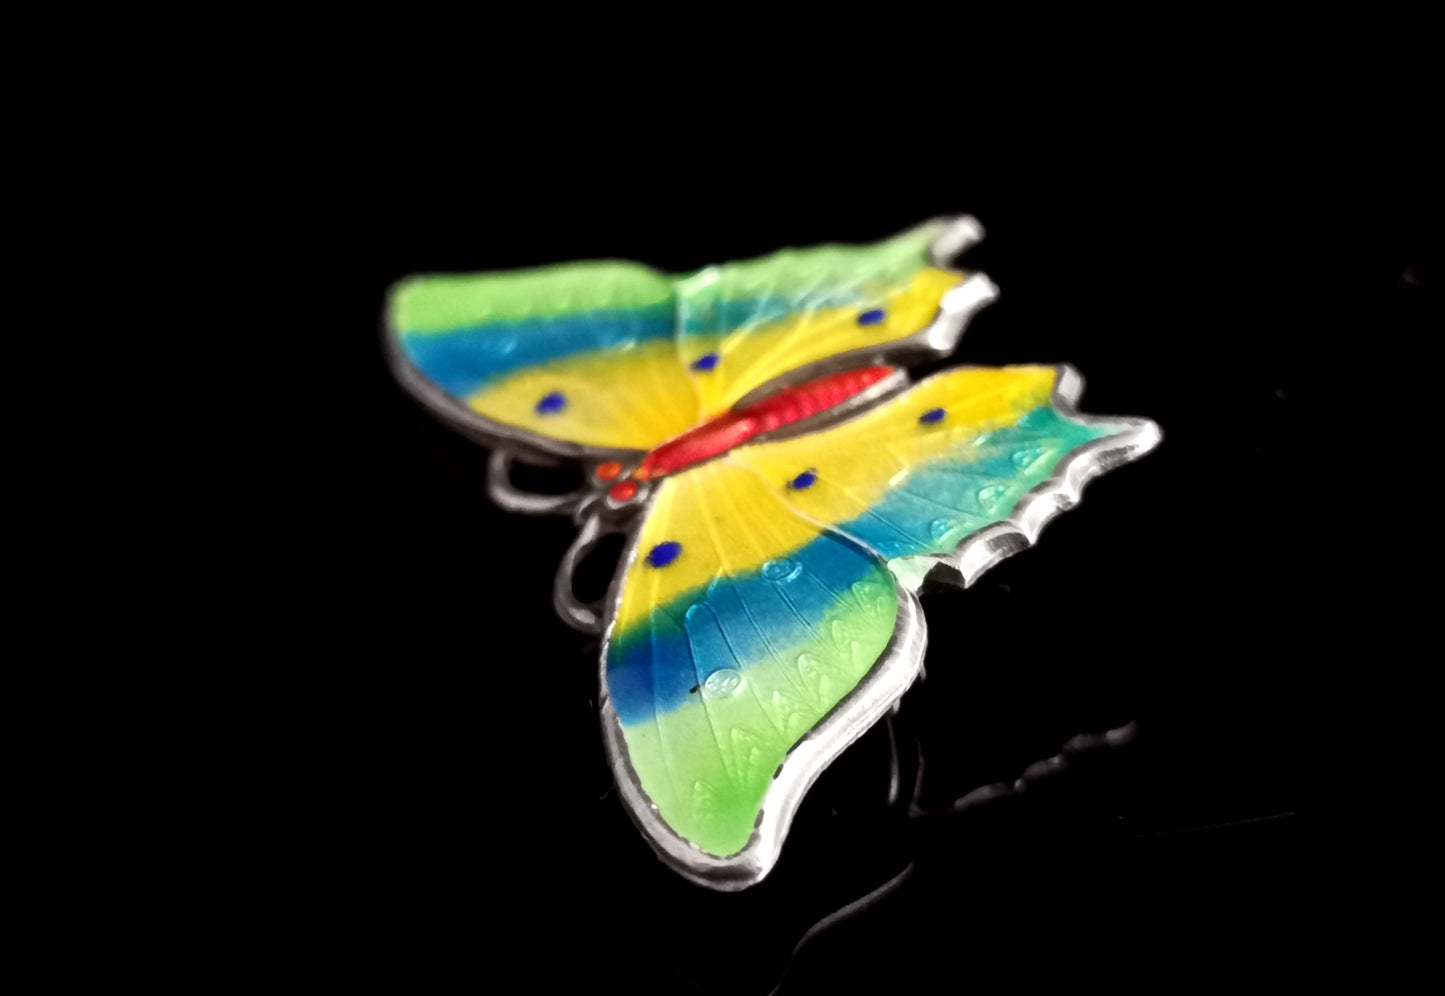 Antique sterling silver and enamel butterfly brooch